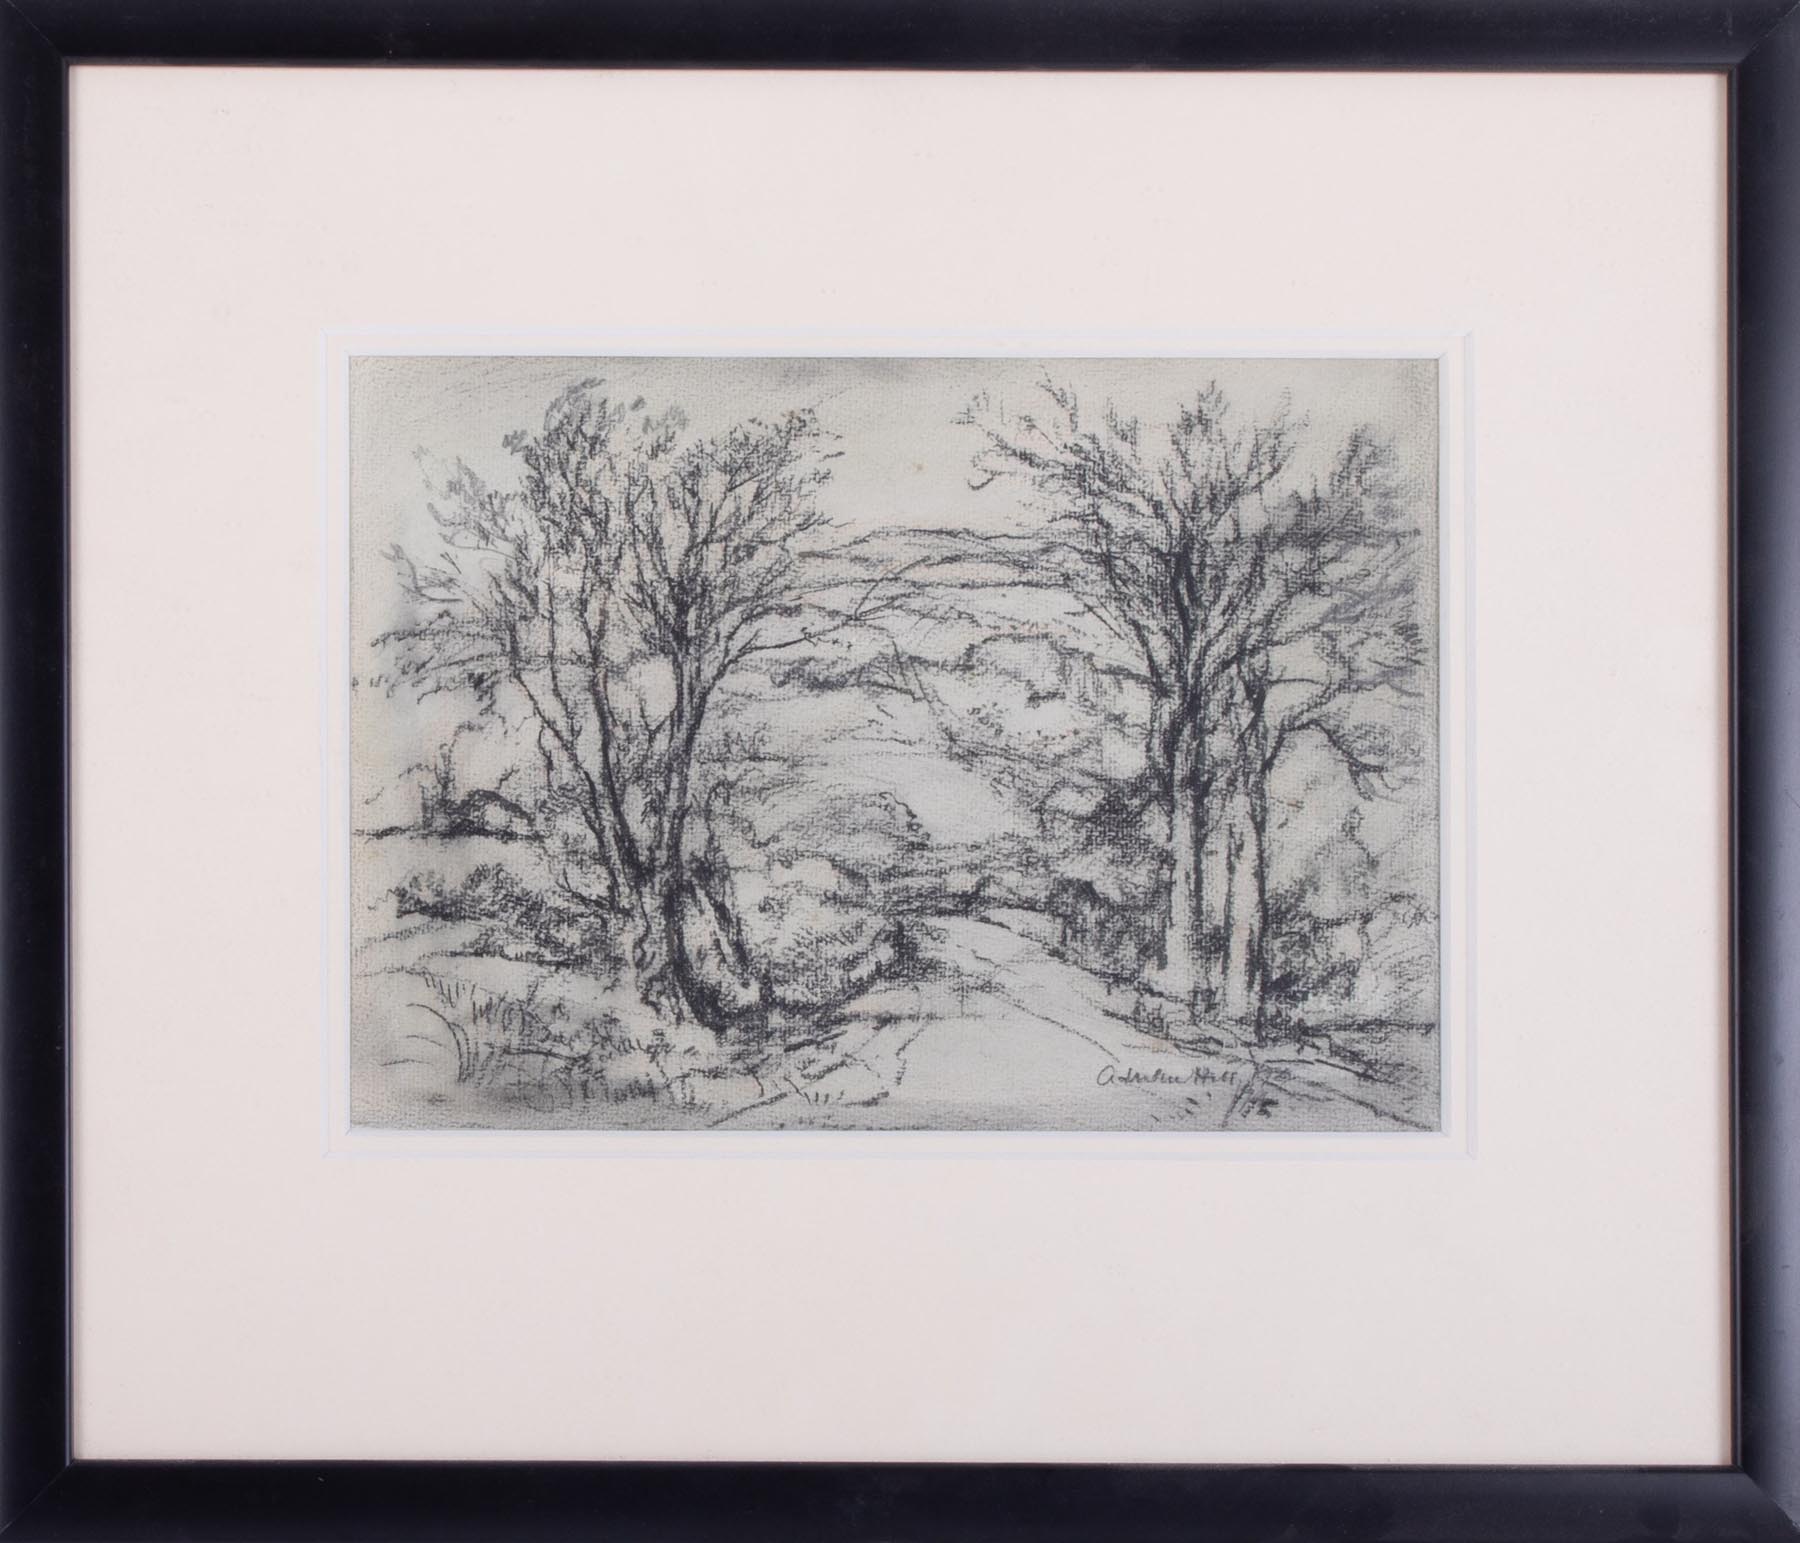 Adrian Hill (1895-1977) 'Country Road' charcoal, watercolour, 21cm x 20cm, framed and glazed.